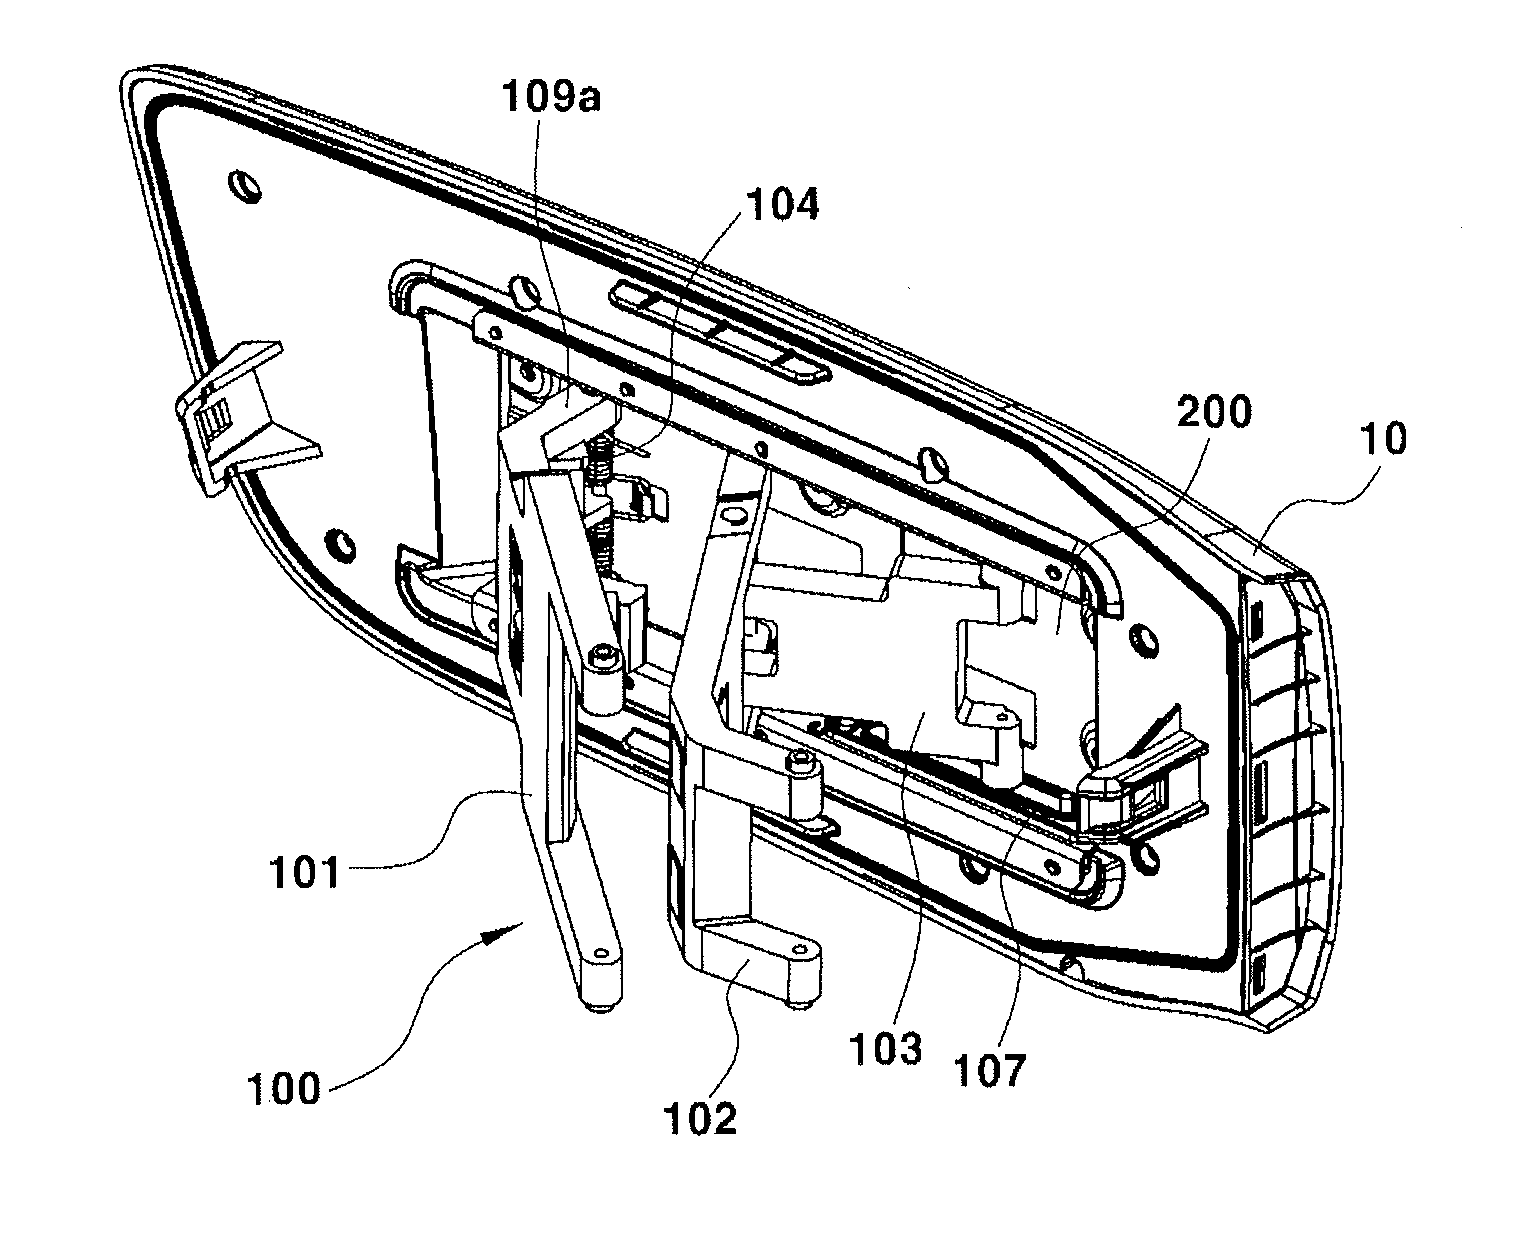 Door assembly for charging port of electric vehicle